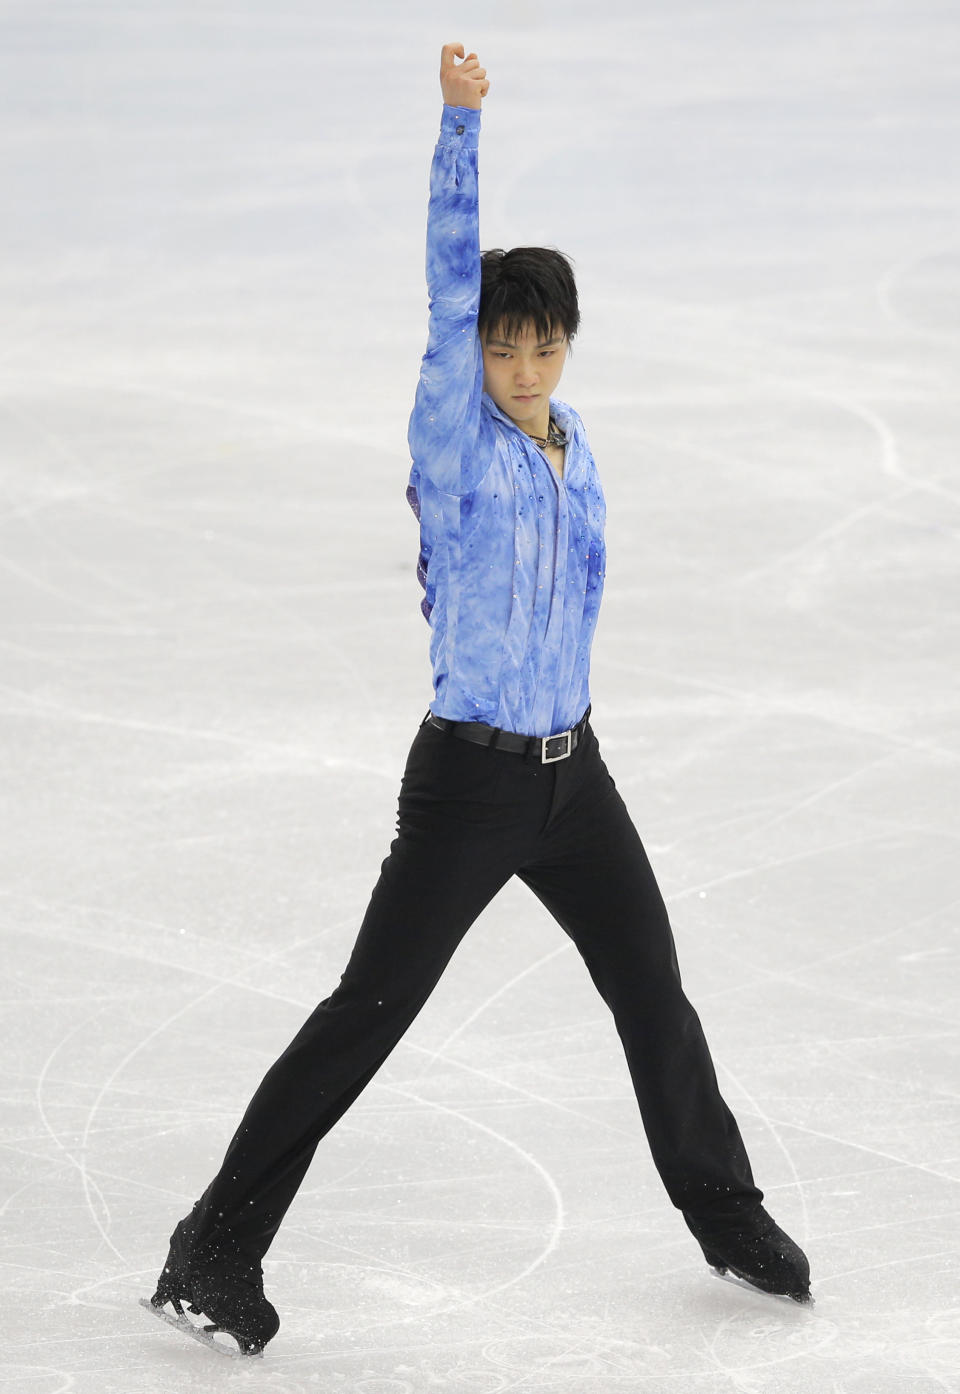 Yuzuru Hanyu of Japan competes in the men's short program figure skating competition at the Iceberg Skating Palace at the 2014 Winter Olympics, Thursday, Feb. 13, 2014, in Sochi, Russia. (AP Photo/Vadim Ghirda)